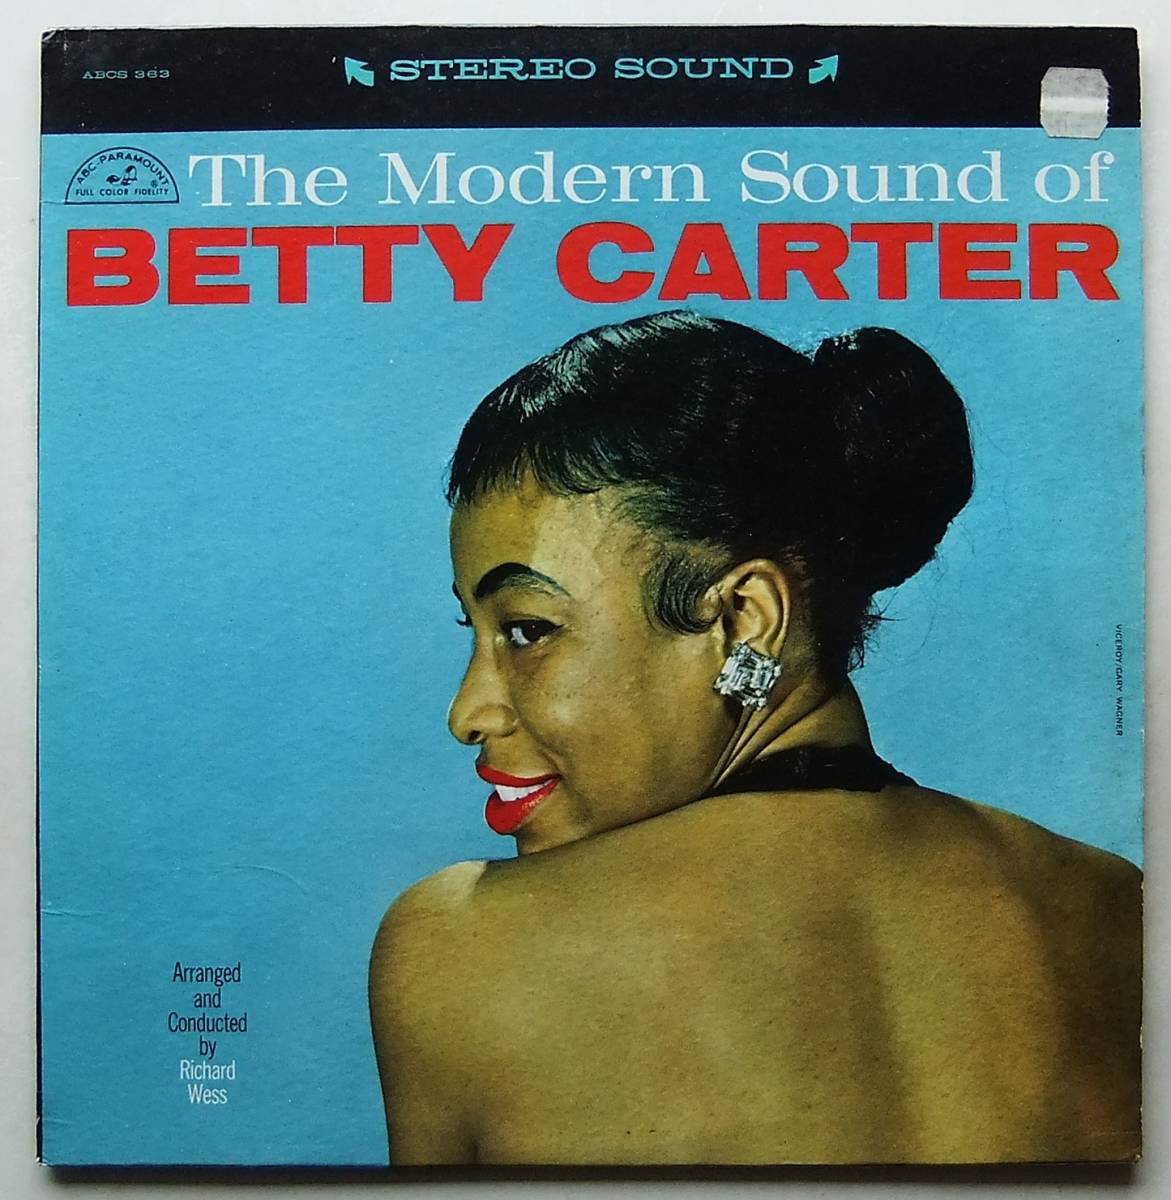 ◆ The Modern Sound of BETTY CARTER ◆ ABC ABCS 363 (color:Bell Sound) ◆ V